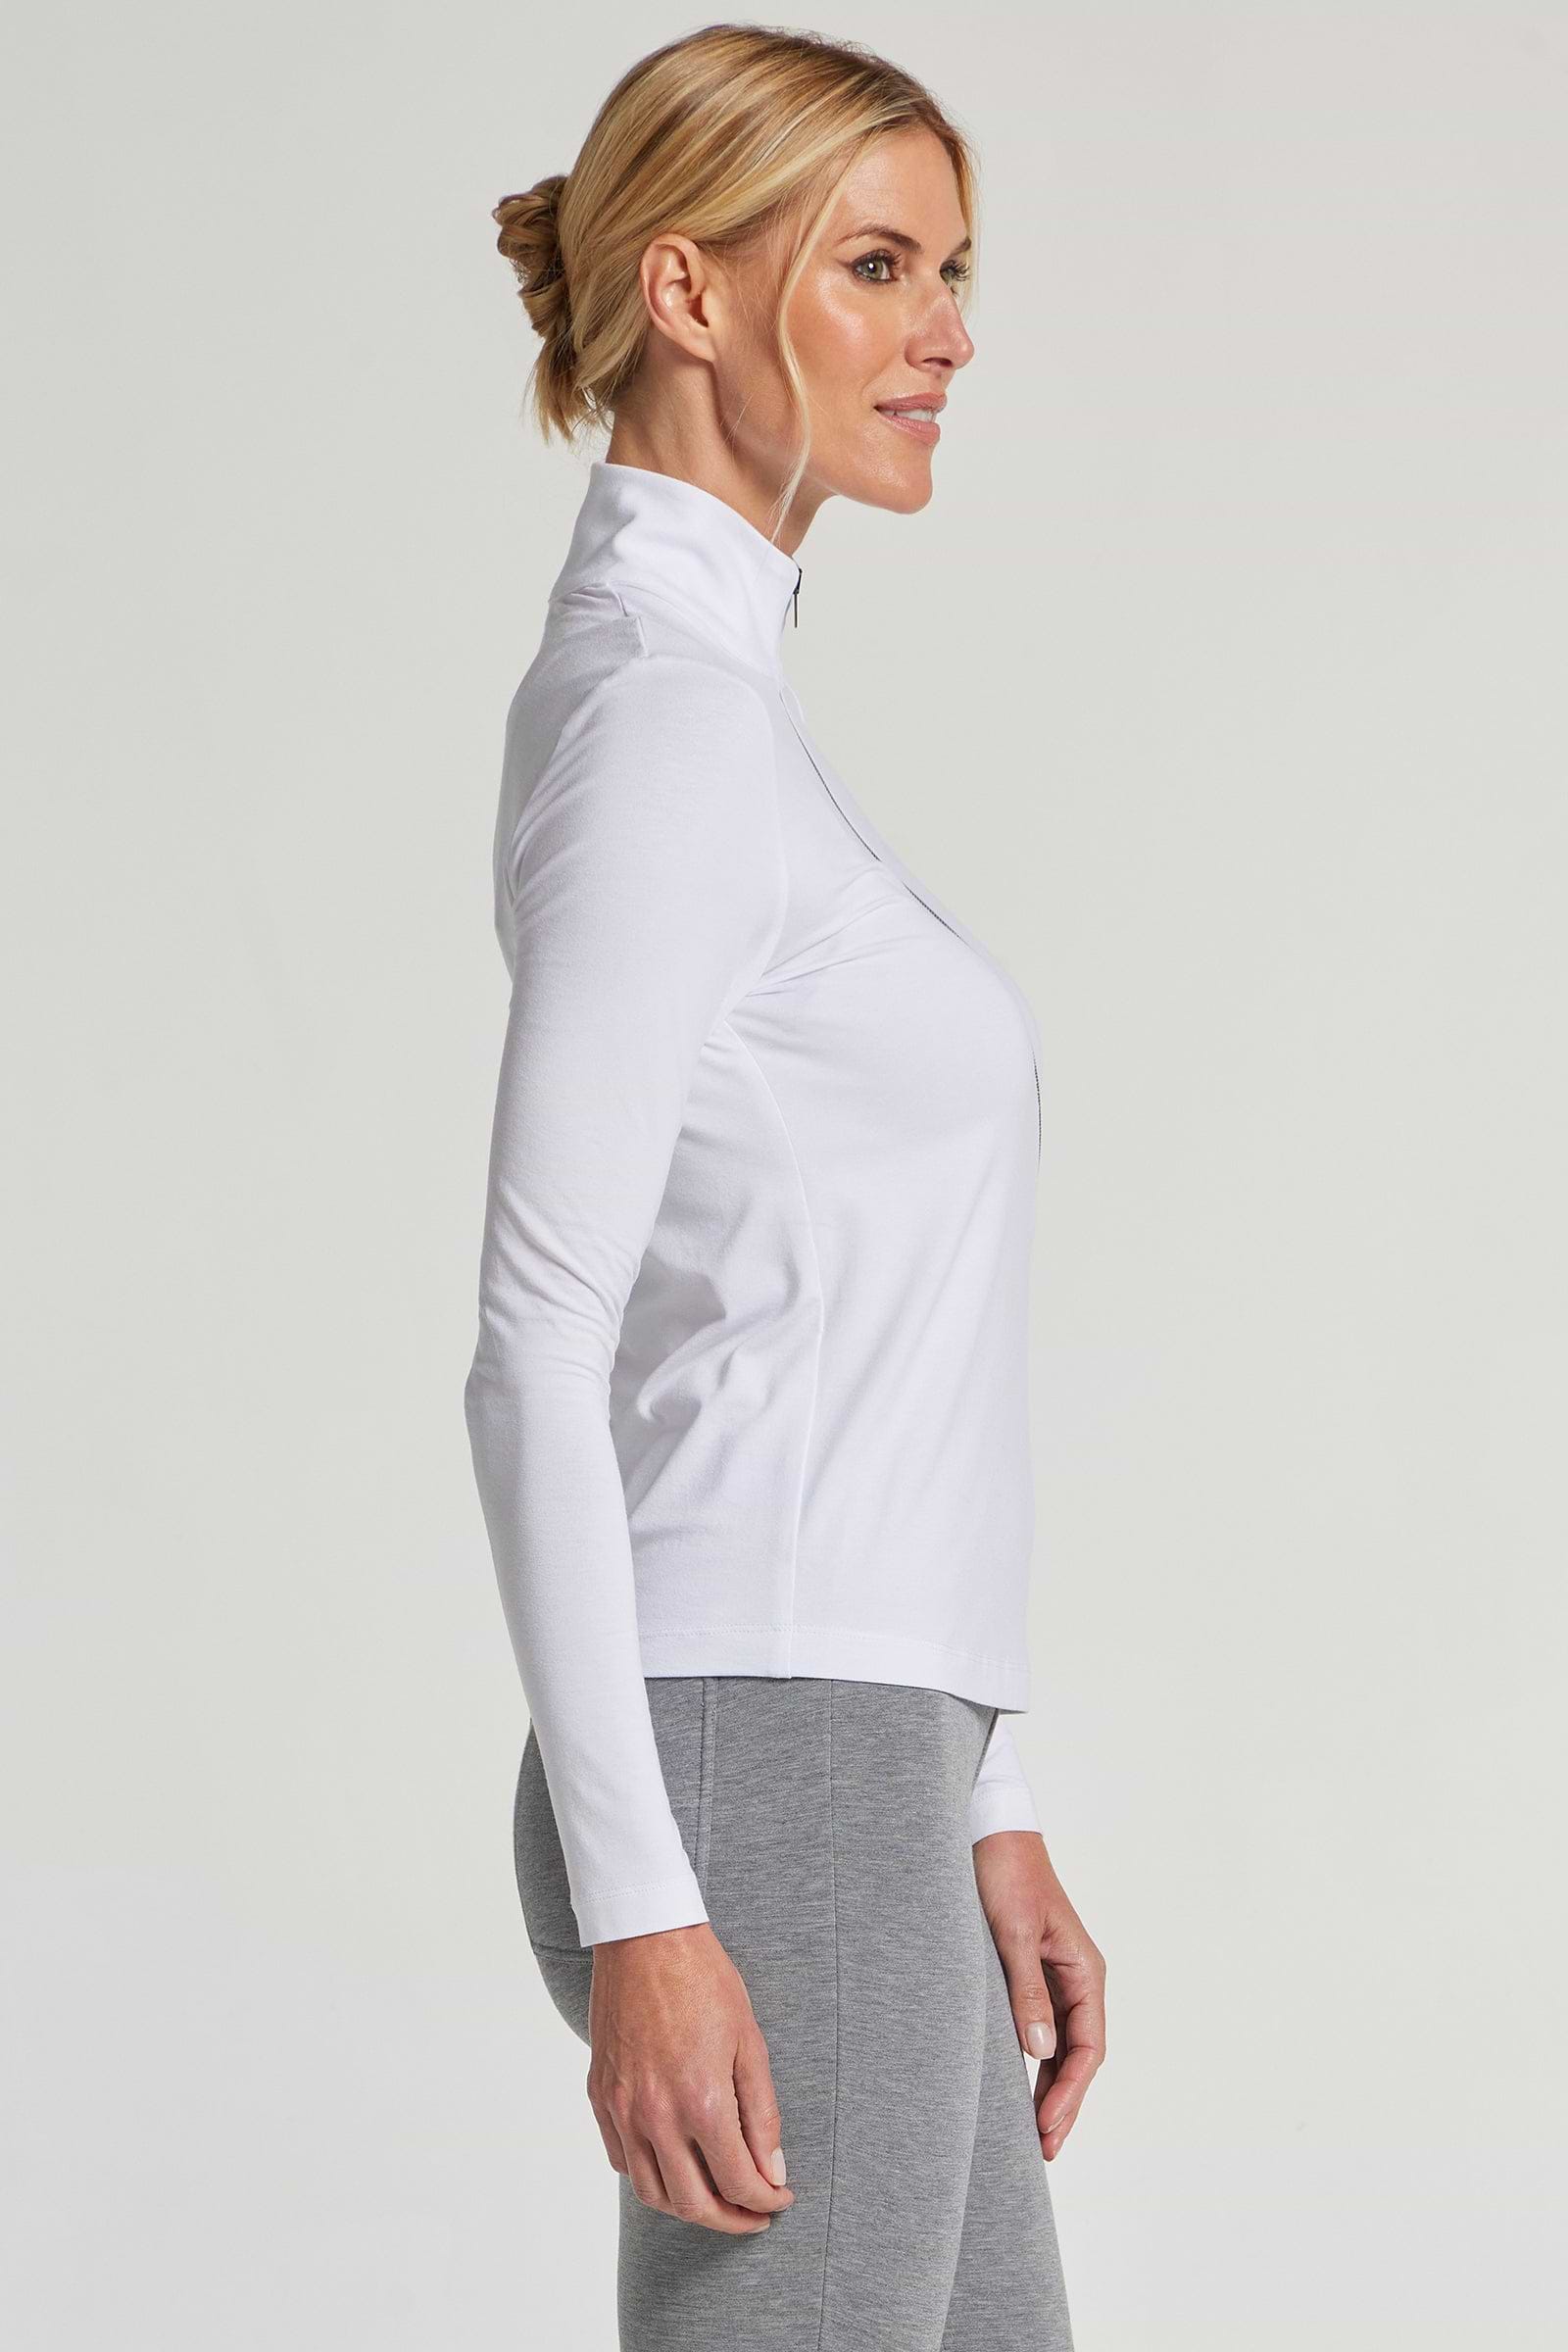 The Best Travel Top. Woman Showing the Side Profile of a Stacey Top in White.